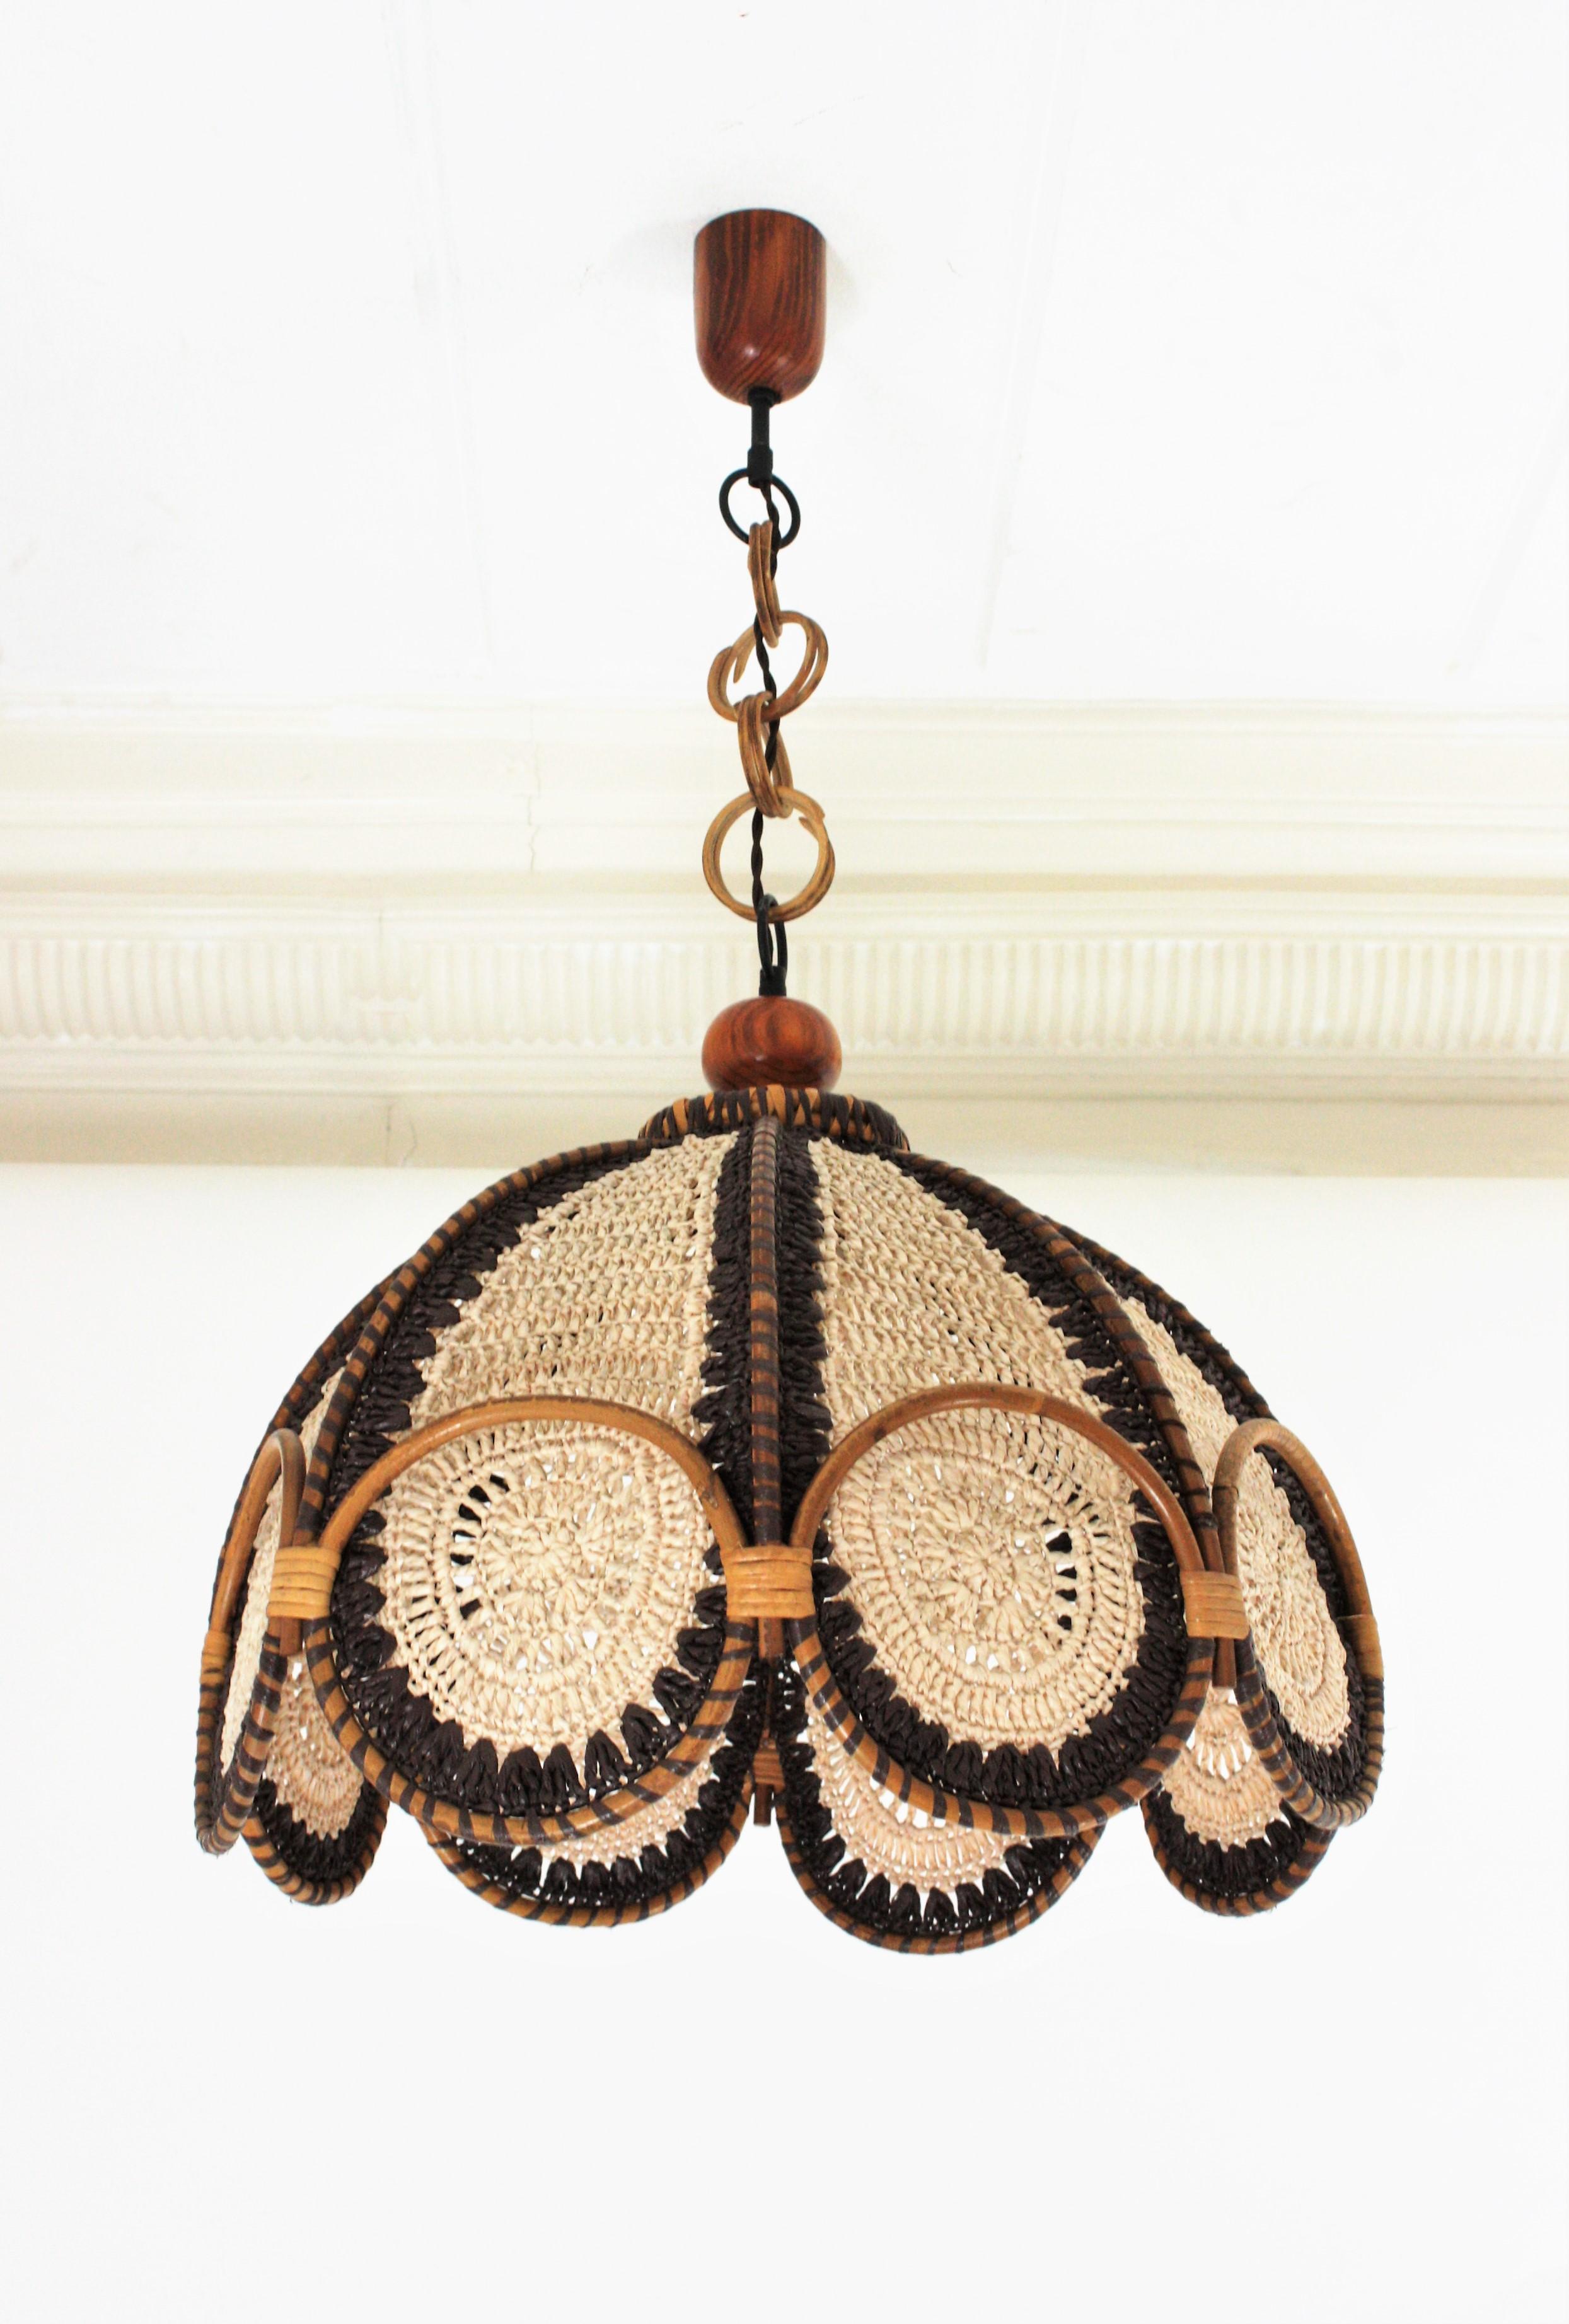 Spanish Modernist Beige Brown Macramé Large Pendant Lamp with Rattan Rings For Sale 8